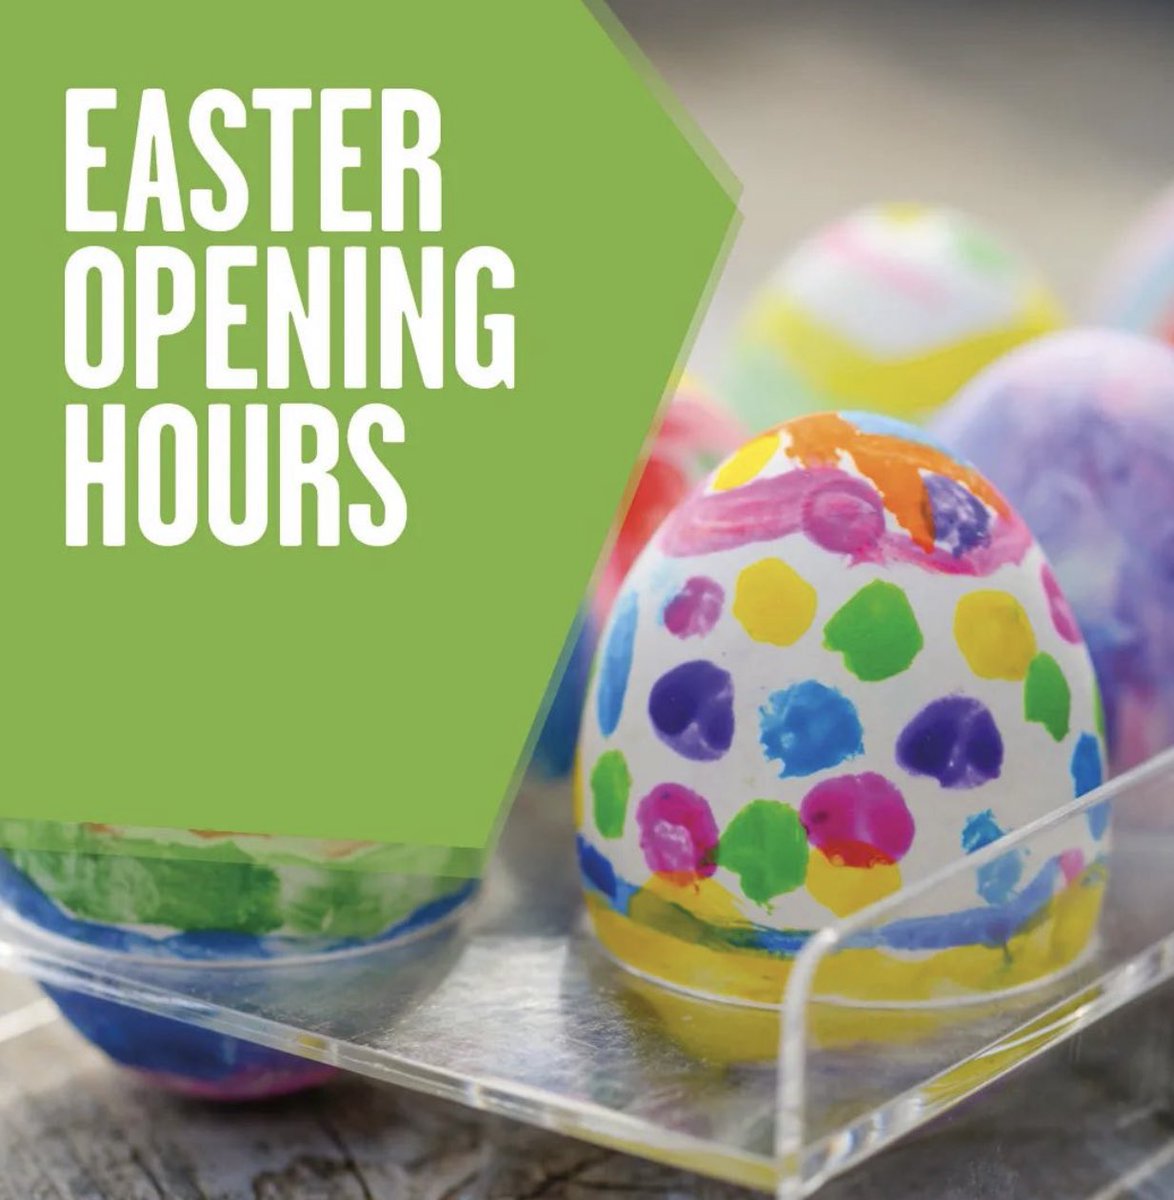 Be aware of our #Easter weekend opening hours! All #Greenwich #Libraries are closed on Friday 29 March, Sunday 31 March + Monday 1 April. Branches will be open 9am-5pm on Saturday 30 March + open as usual from 9am on Tuesday 2 April. 📚 Happy Easter! @Better_UK @Royal_Greenwich